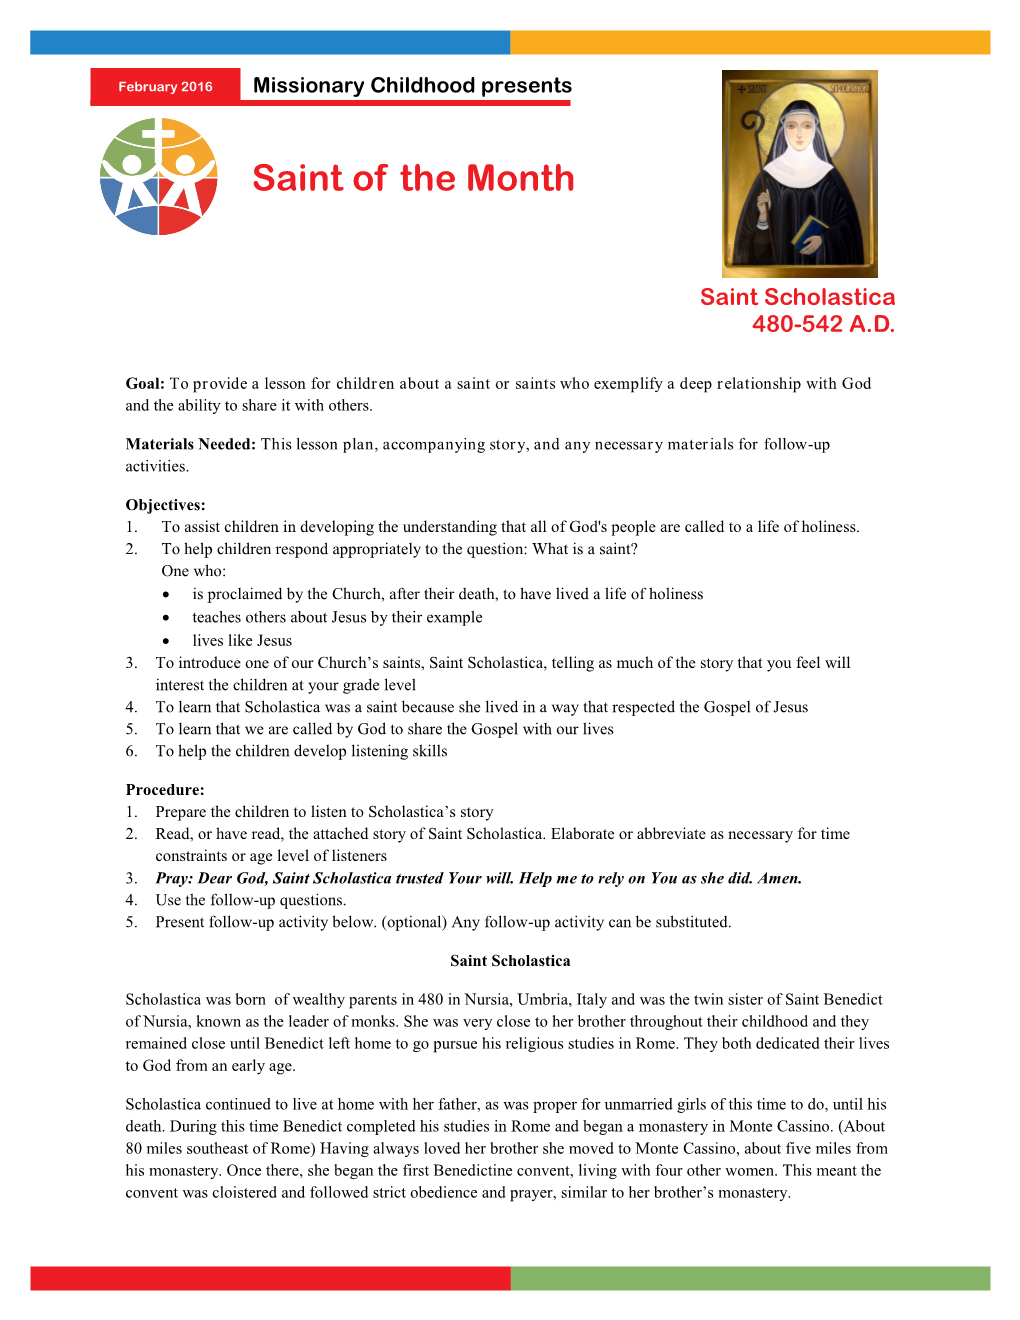 Saint of the Month